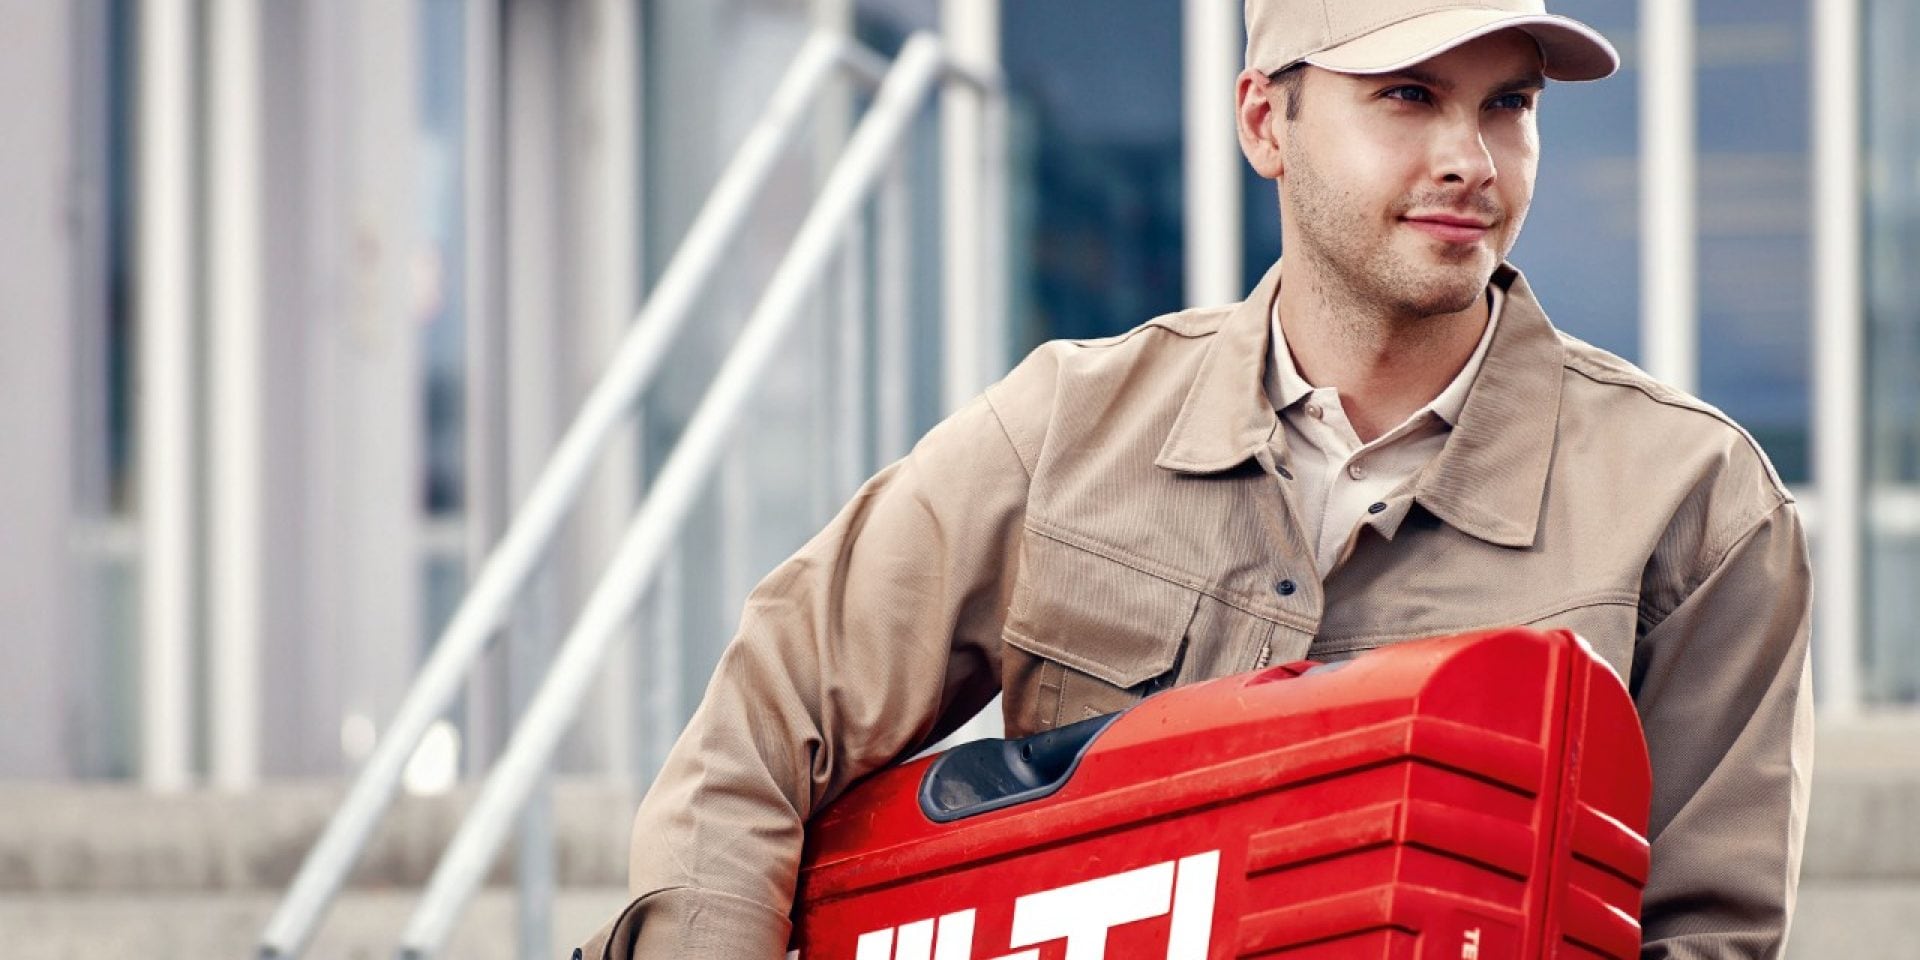 Hilti express delivery